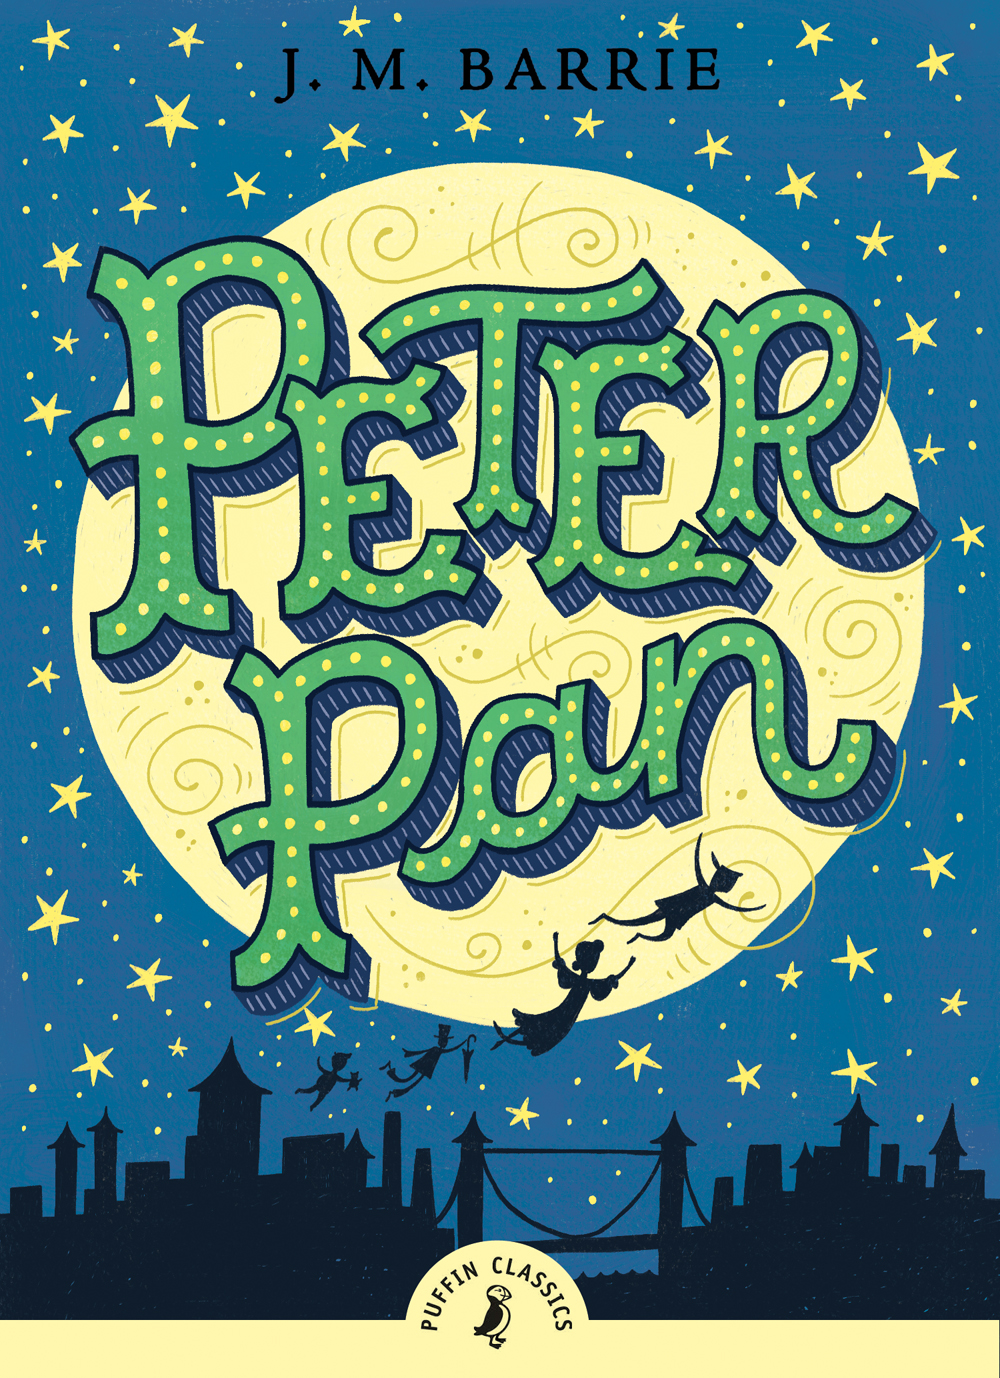 Peter Pan Book Cover on Behance